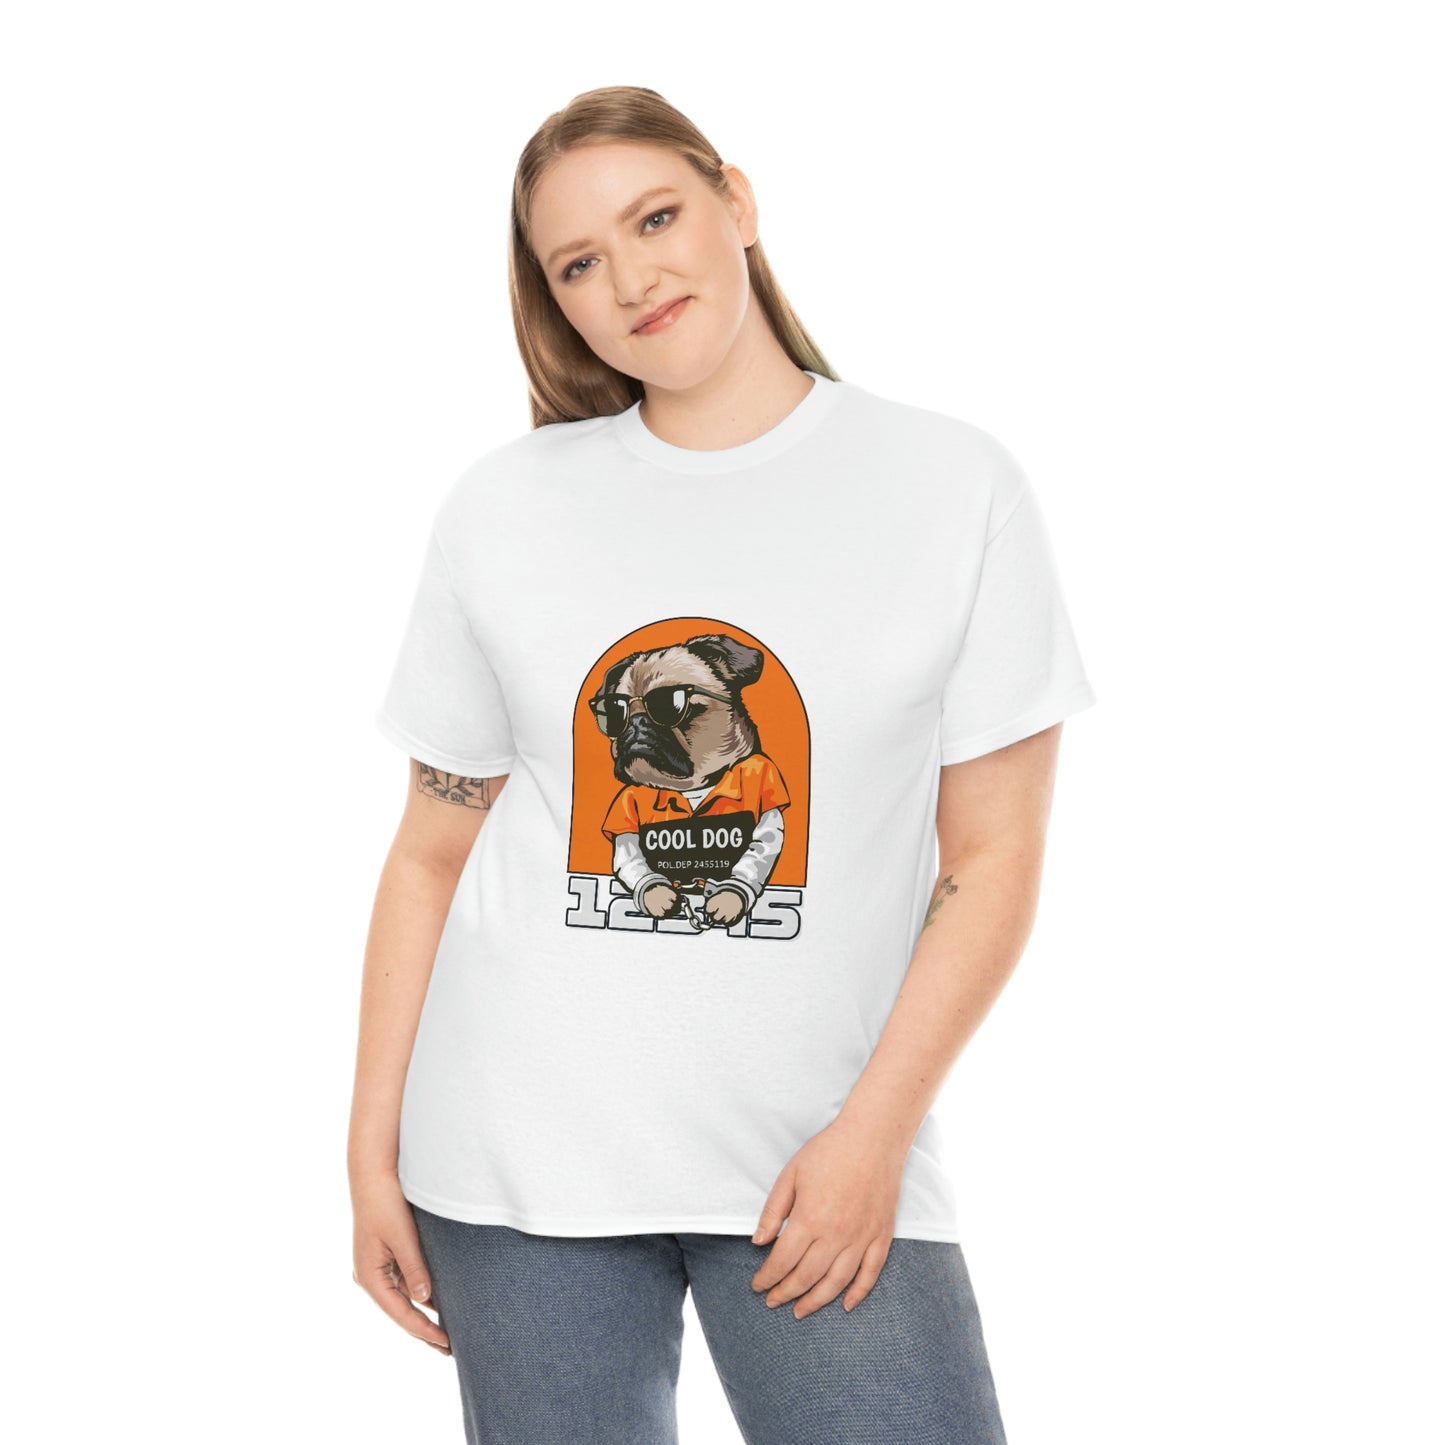 A Tee Shirt, R-Shirt for Women and Men Cool Dog Tee Unisex Heavy Cotton Tee